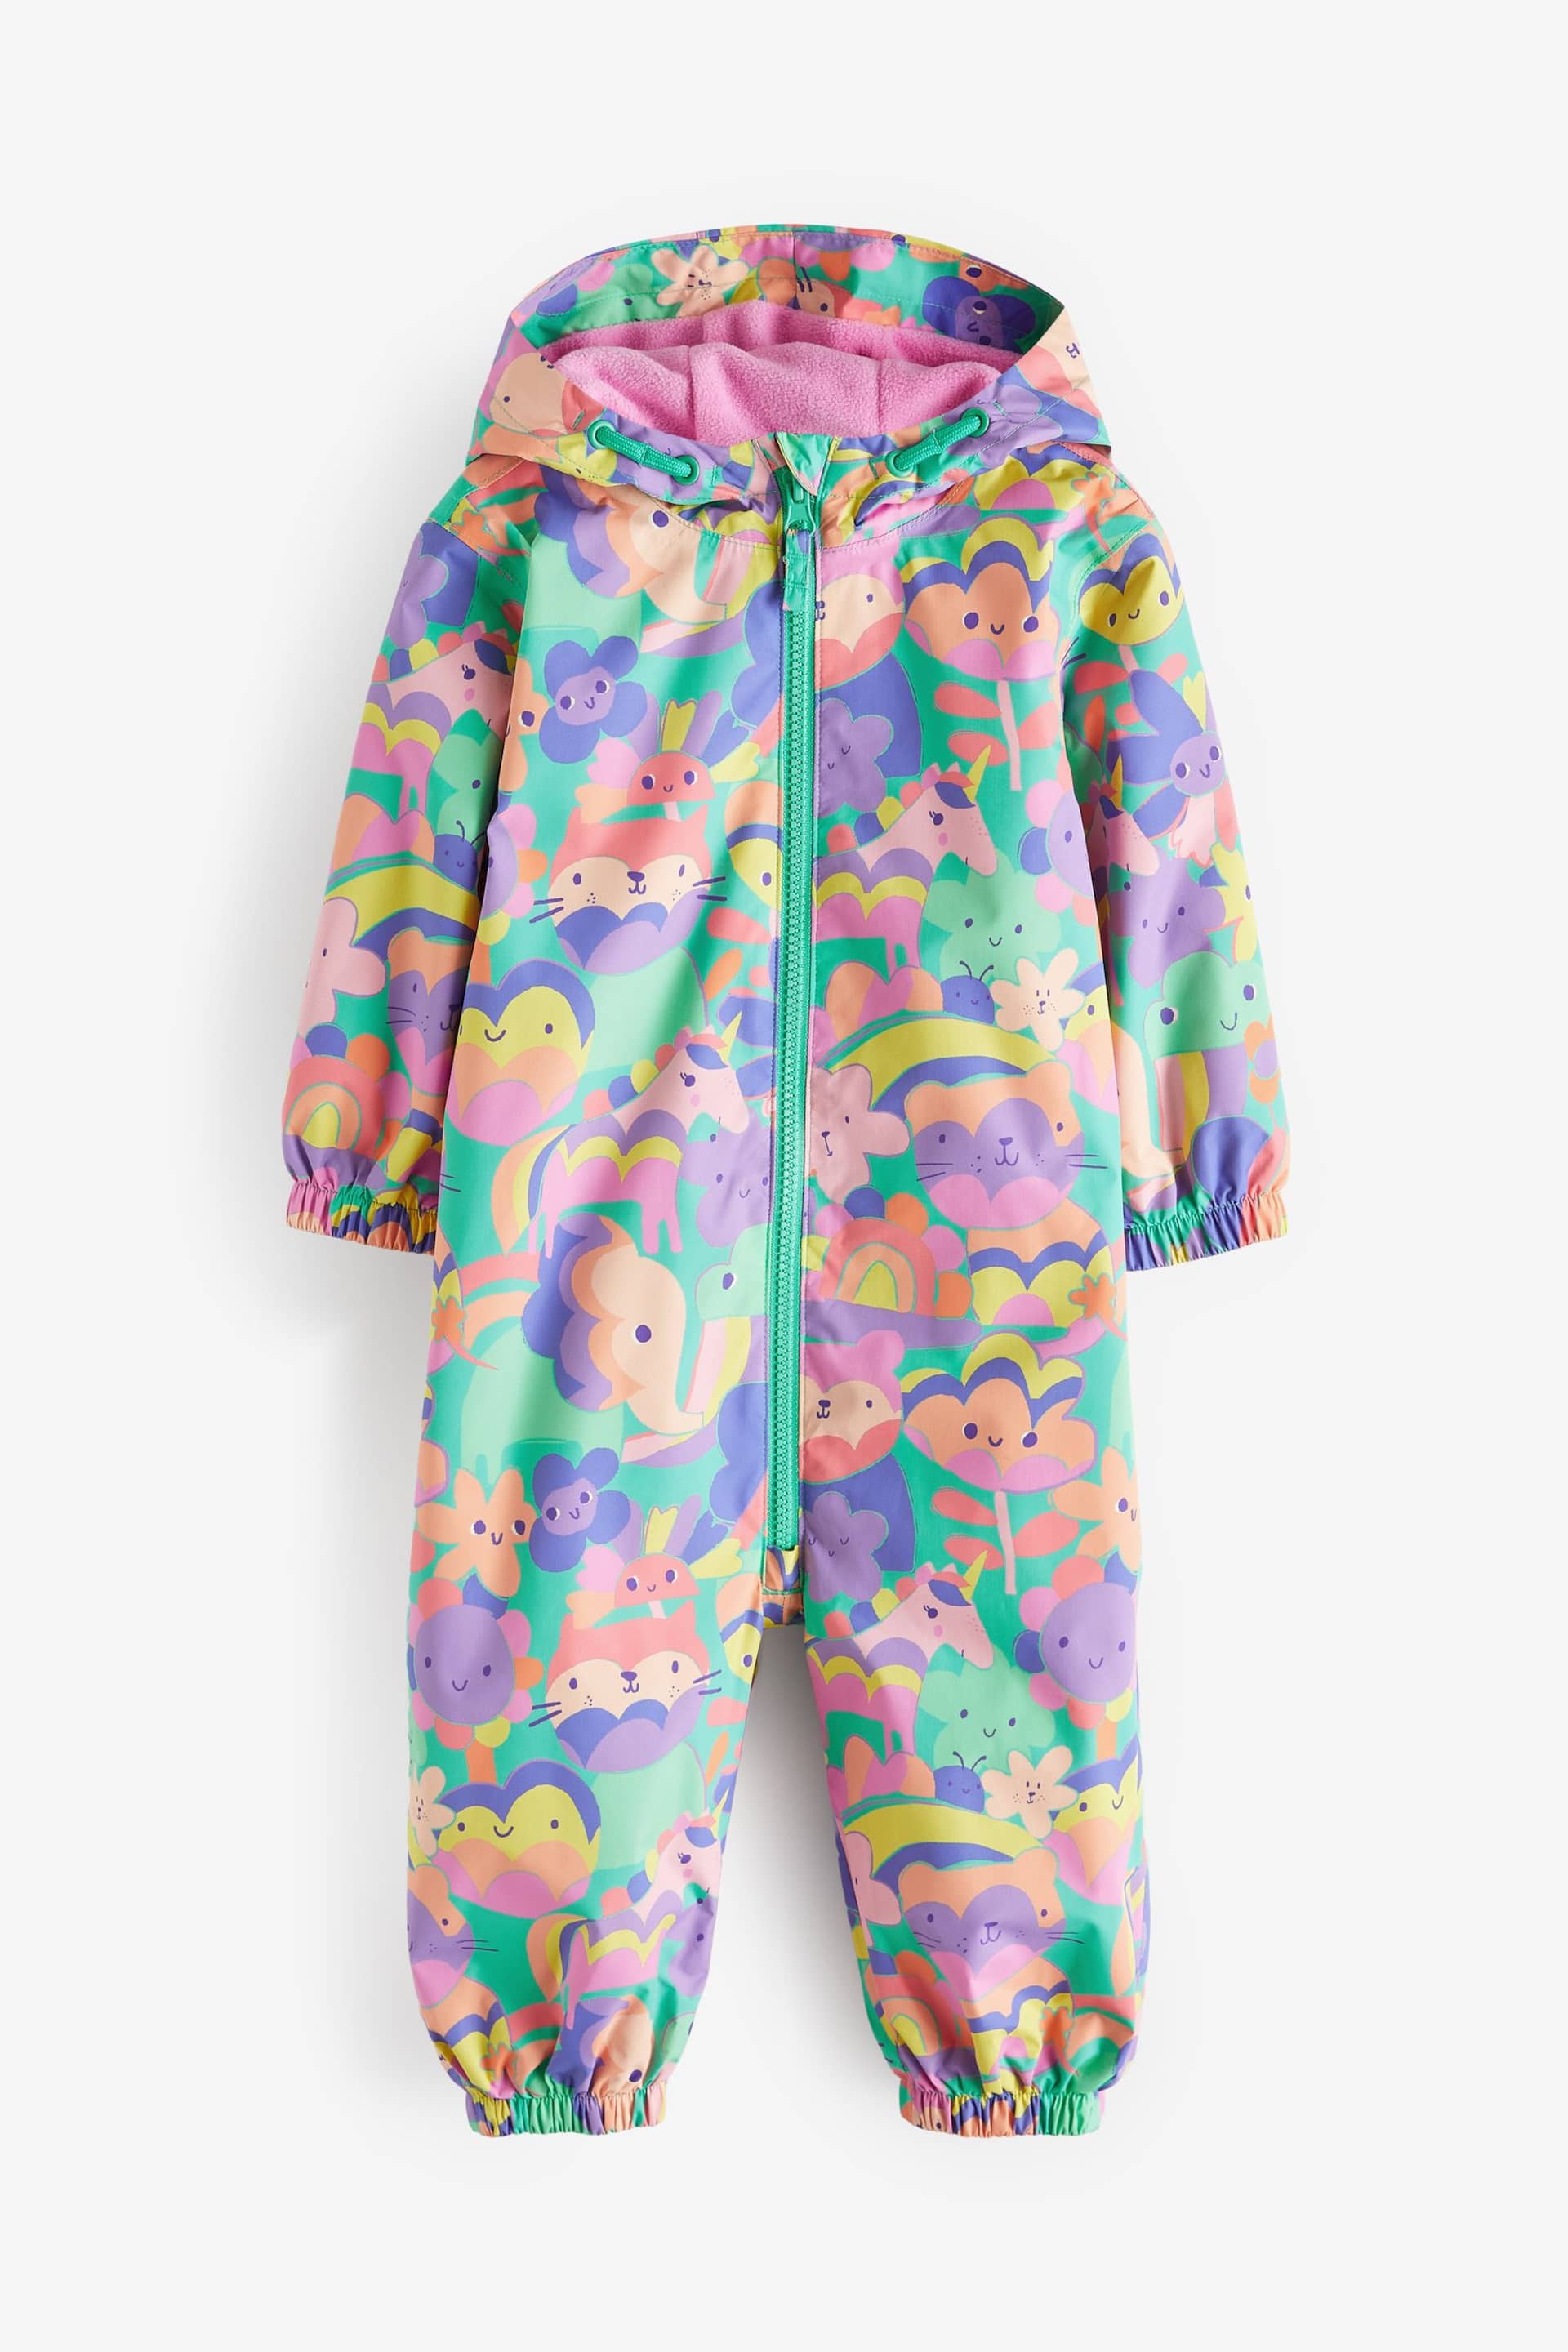 Multi Lightweight Waterproof Fleece Lined Printed Puddlesuit (3mths-7yrs) - Image 6 of 9